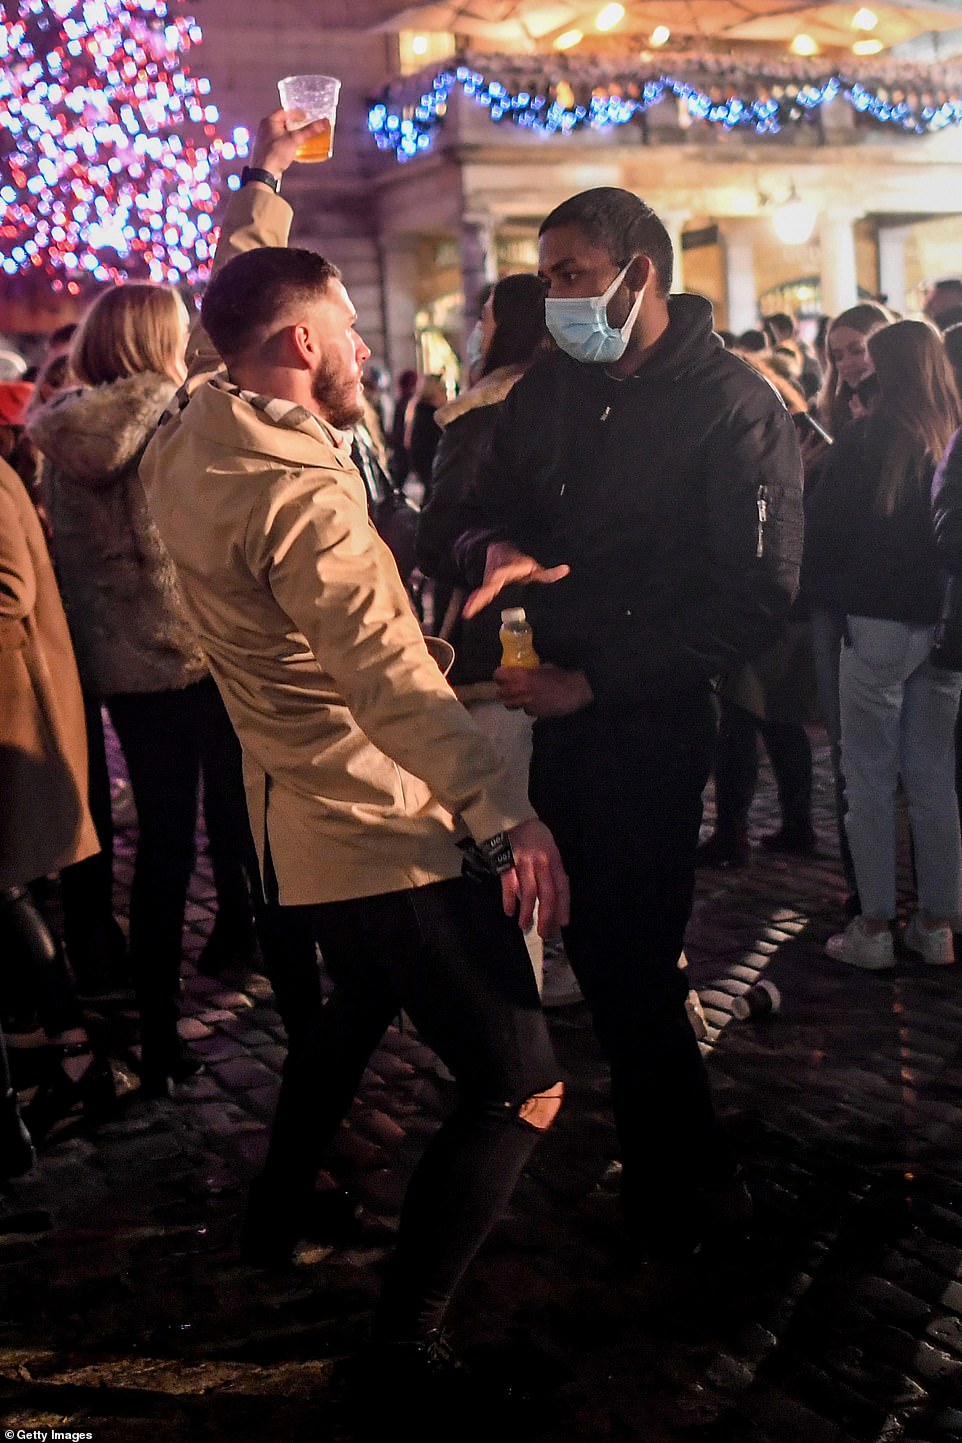 A man carrying a pint dances in front of a man wearing a mask in Covent Garden in London's West End on December 5